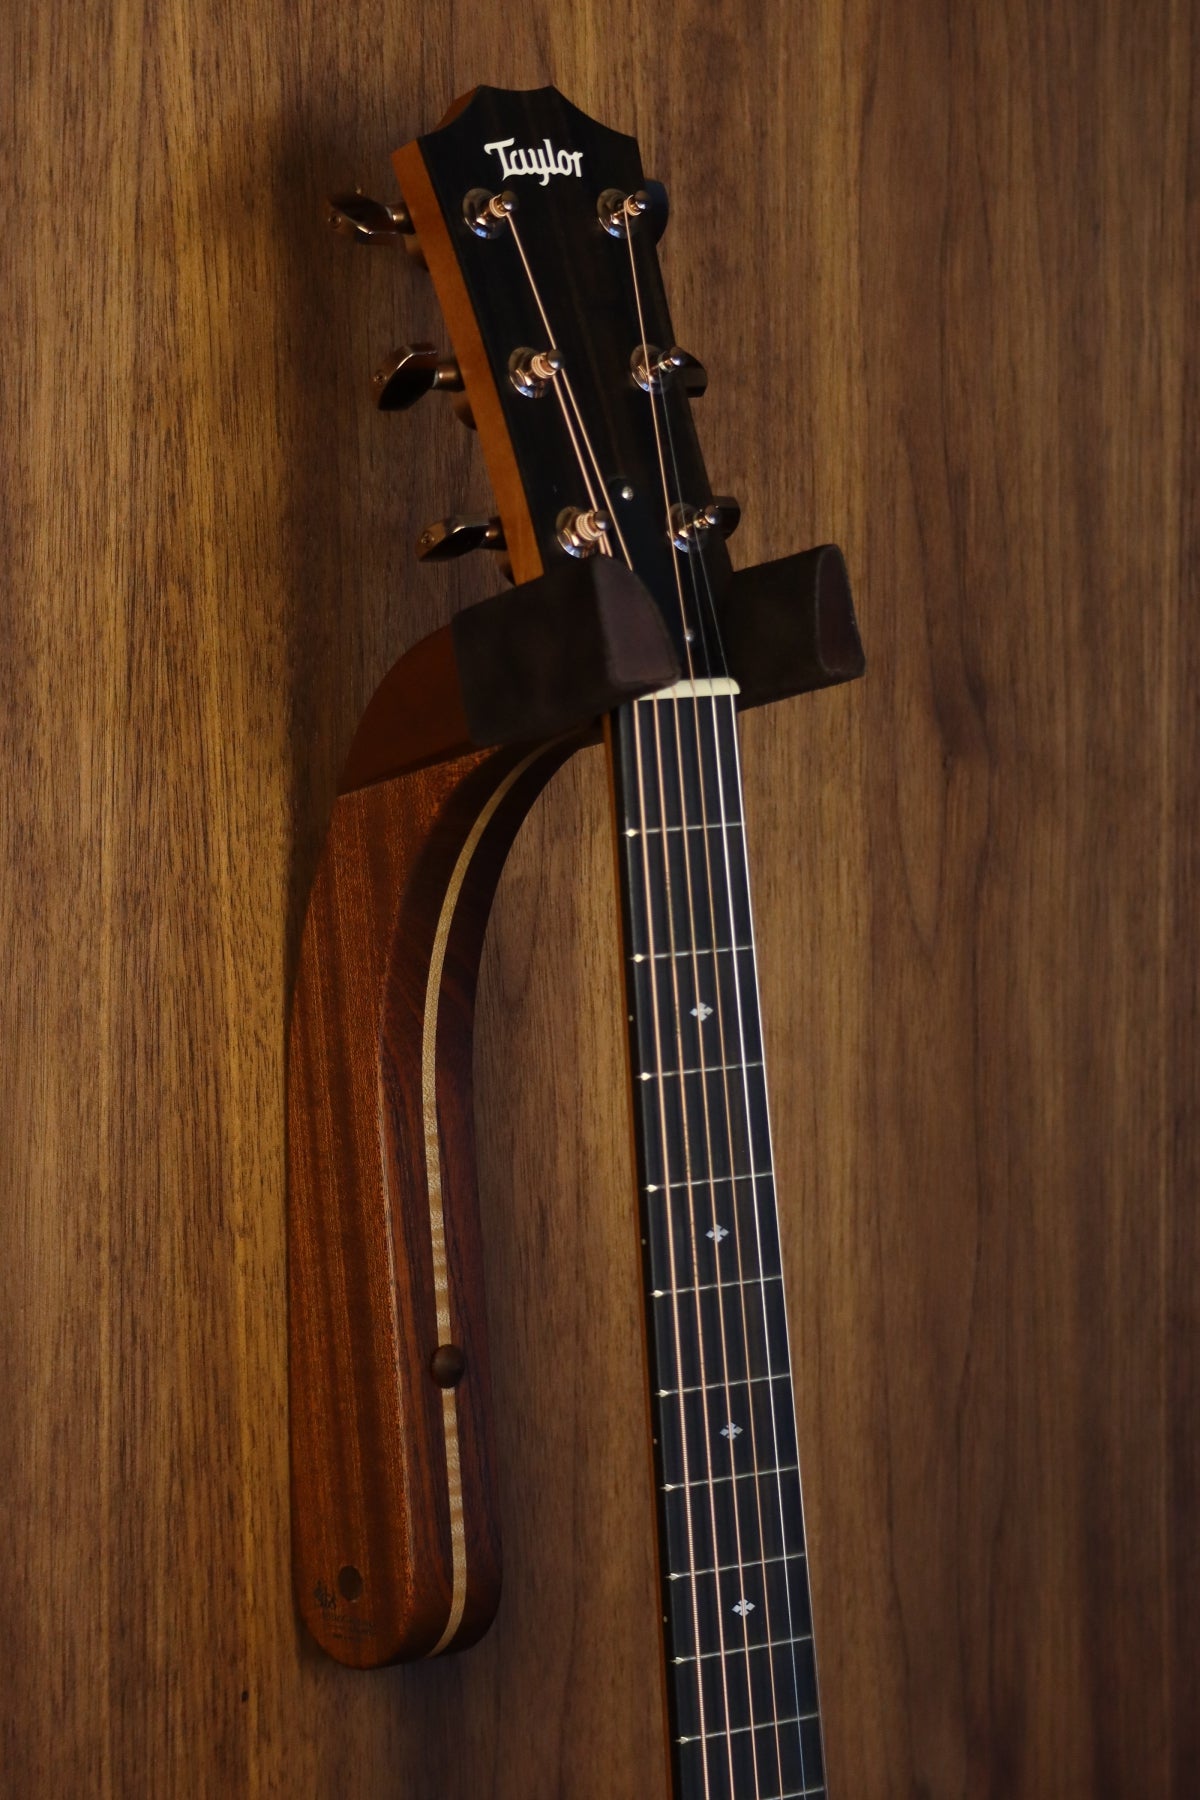 Sapele mahogany and curly maple wood guitar wall mount hanger installed on paneled wall with Taylor guitar